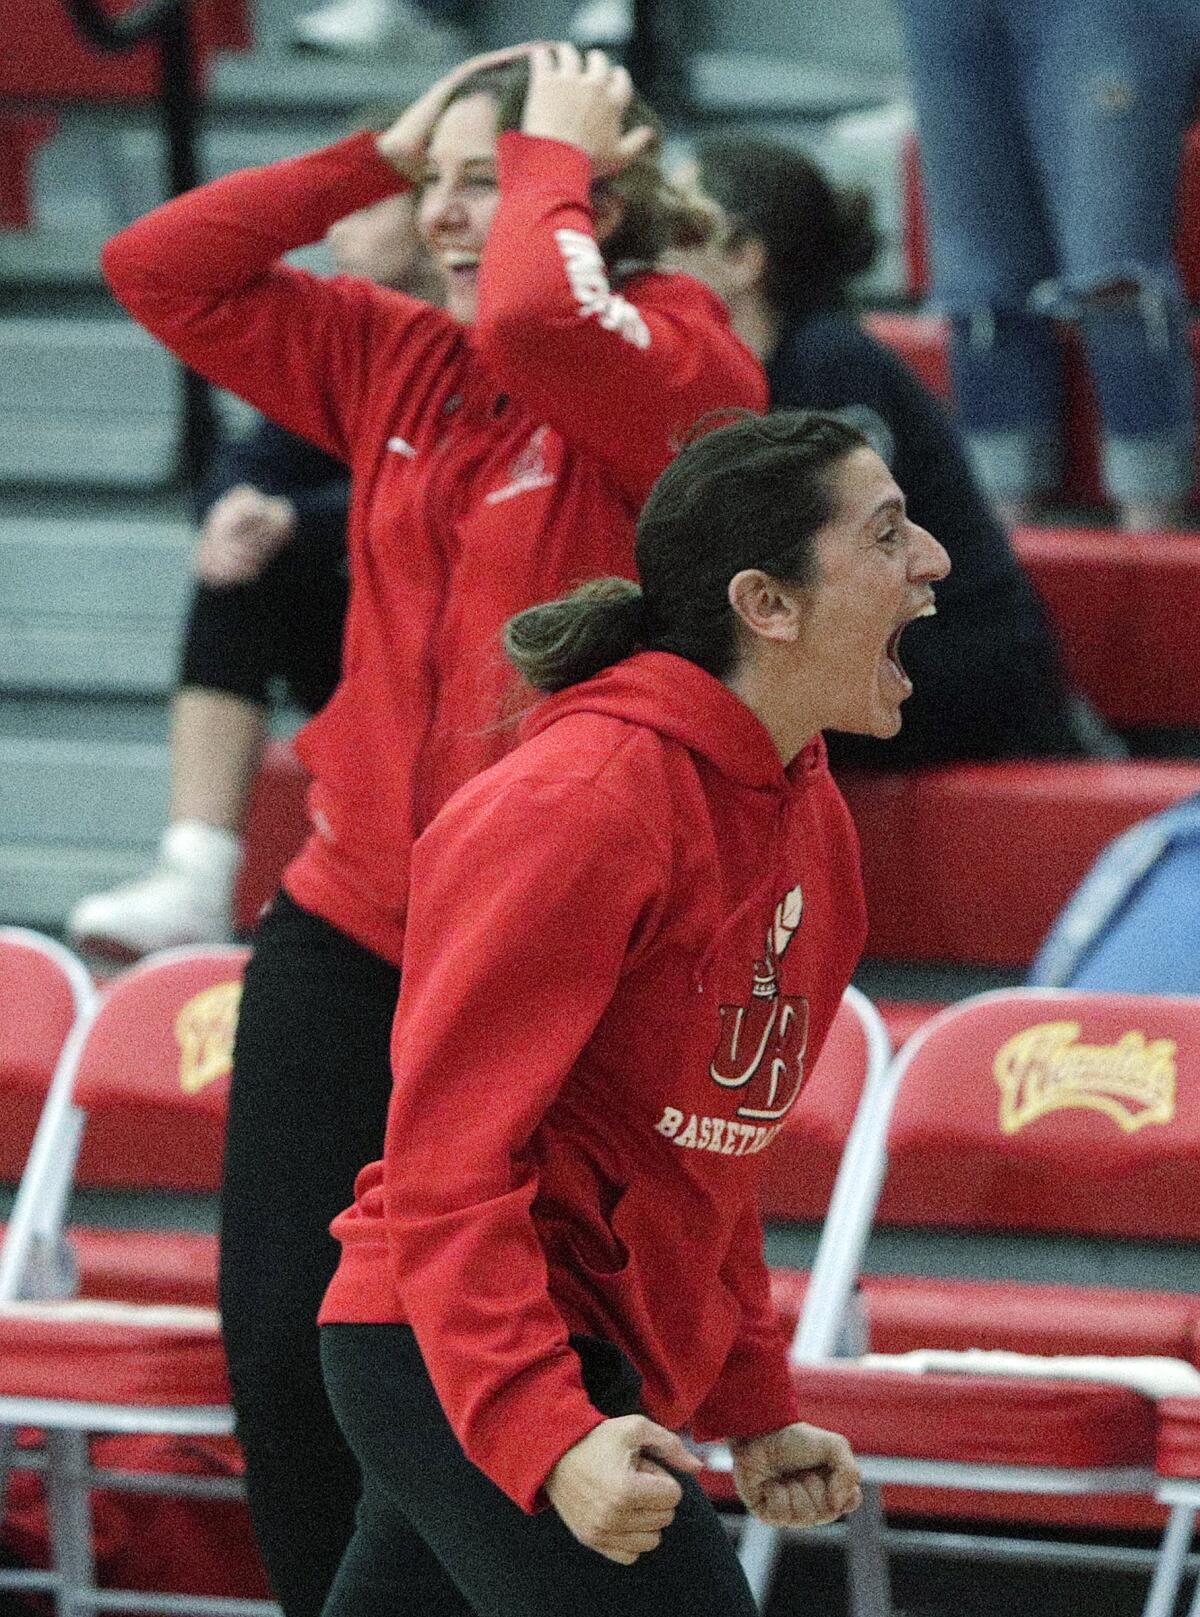 Burroughs' head coach Vicky Oganyan gives a huge yell for victory after a tense conclusion to a tough game with Whittier Christian in the CIF Southern Section Division II-A girls' basketball quarterfinal at Whittier Christian High School in La Habra on Wednesday, February 19, 2020. Burroughs won the game 41-39, a game that was hard fought until the last points were scored